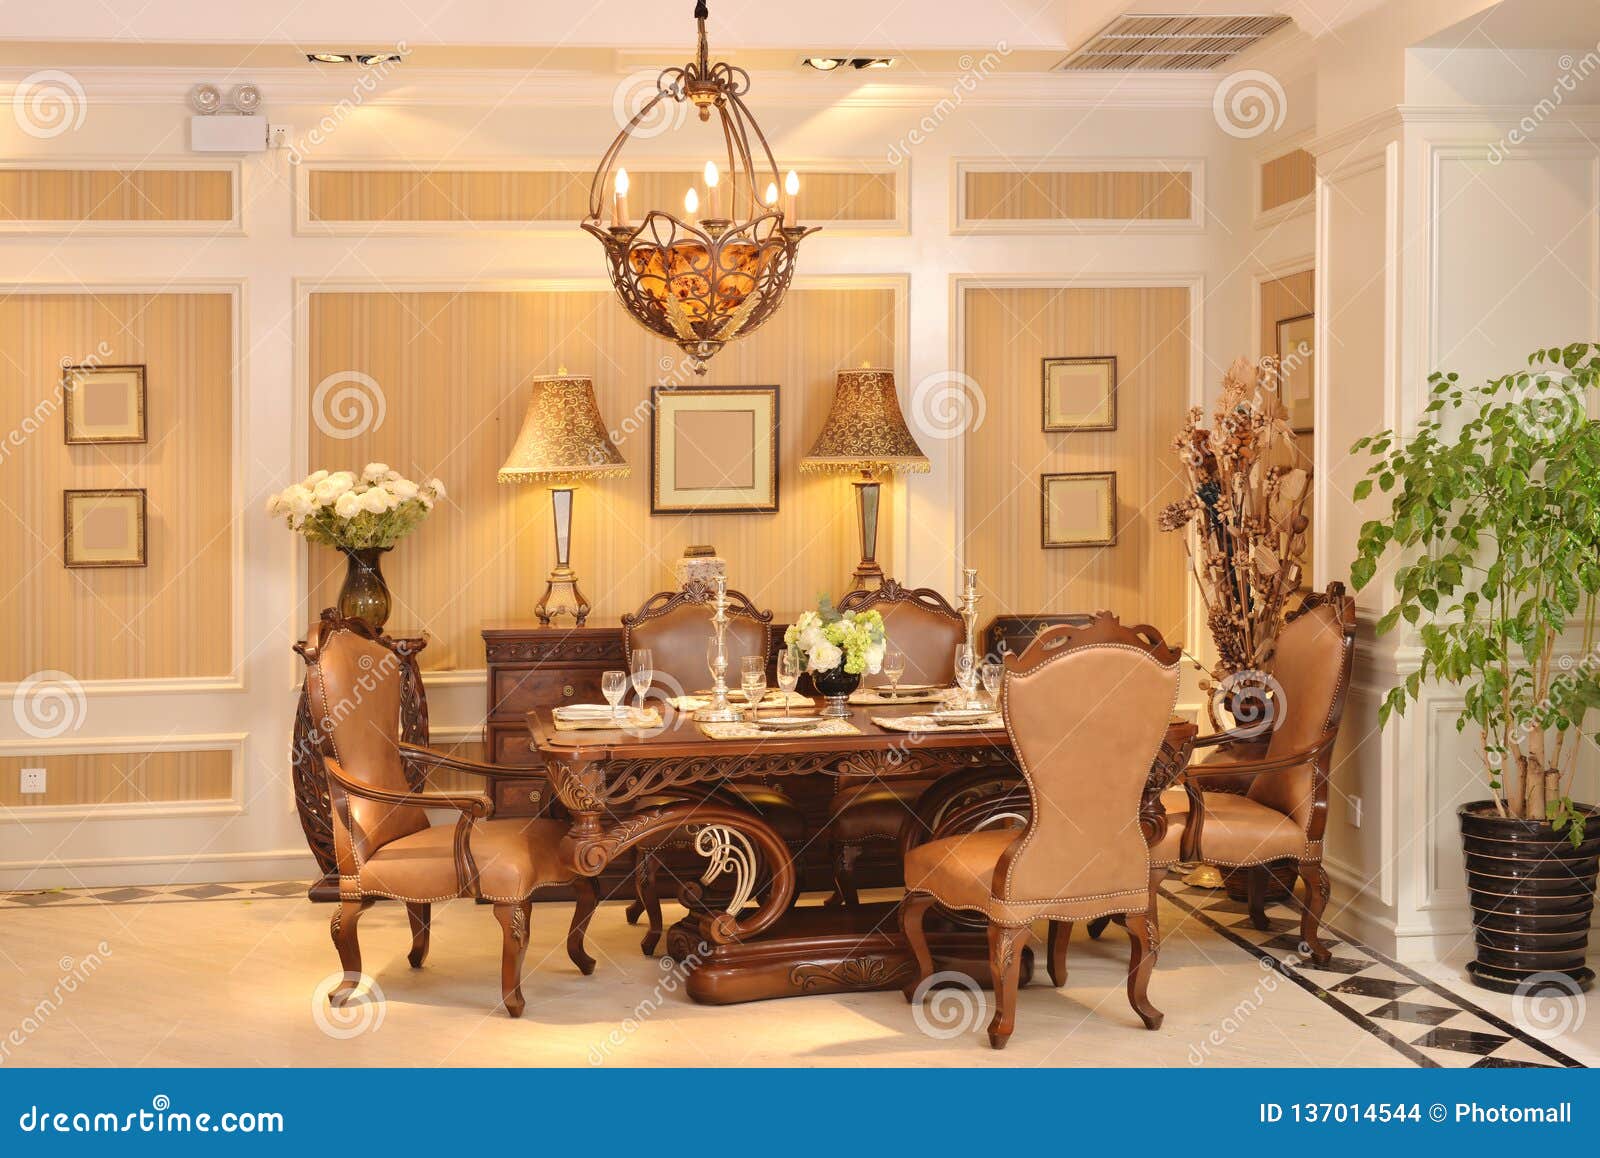 luxury dining room appliance home fitment furniture fitting